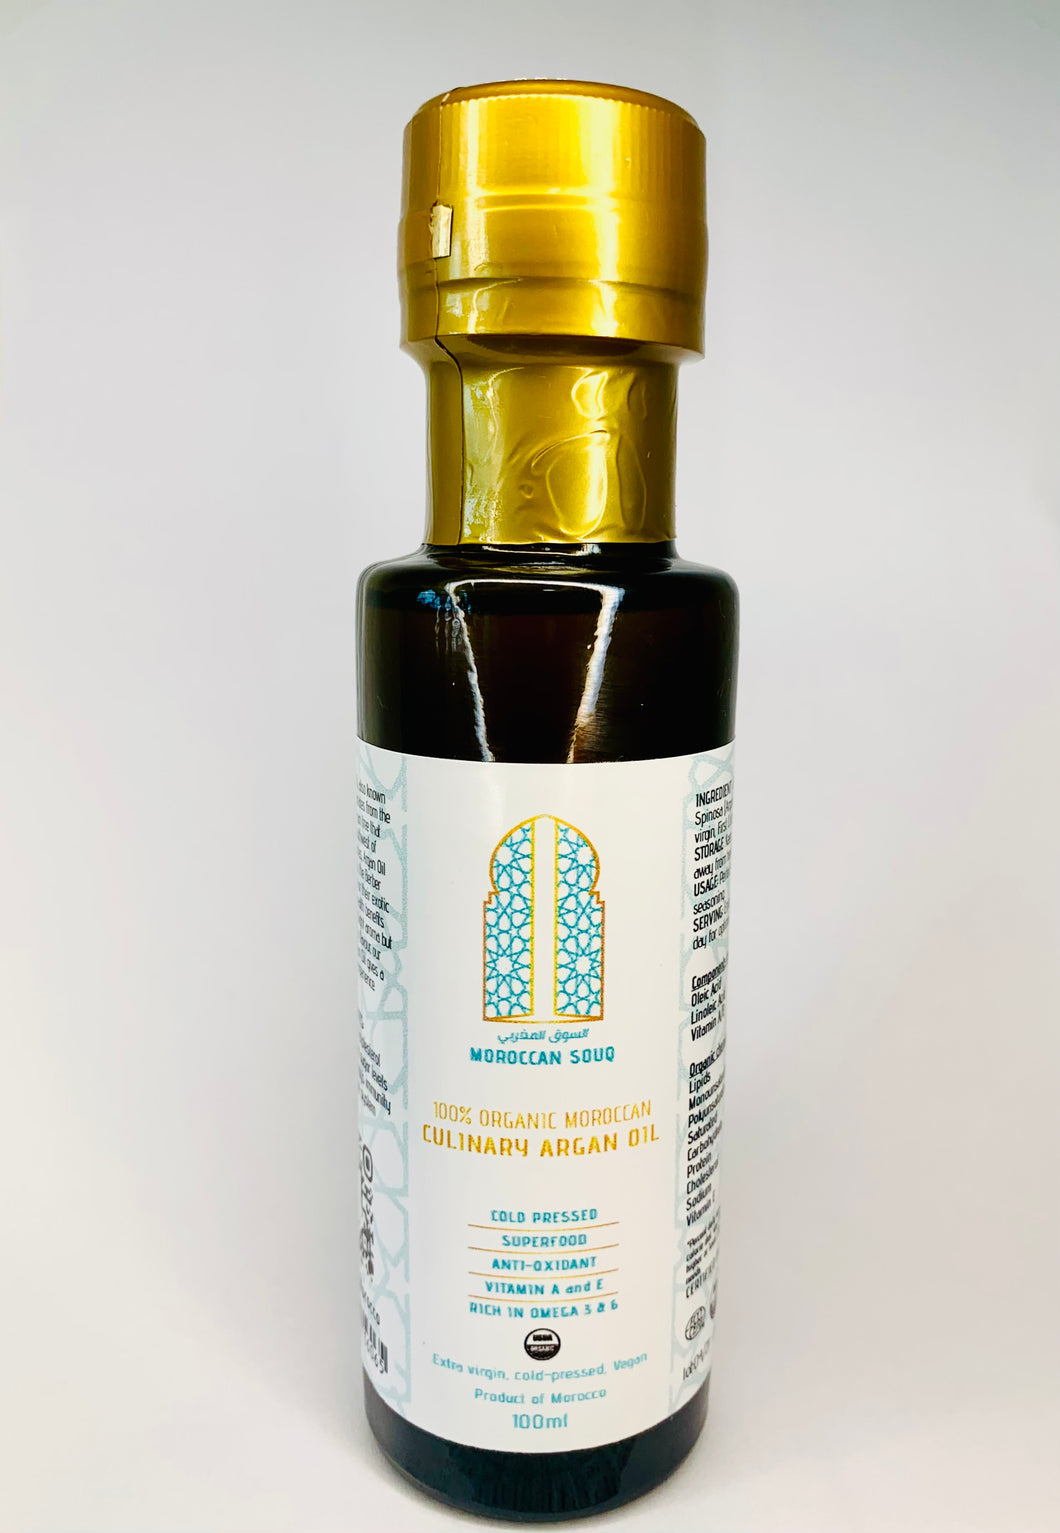 100% Organic Culinary Moroccan Argan Oil  100ml. Certified Organic by ECOCERT and USDA. Hand-harvested, first cold-pressed, cruelty-free, vegan, and 100% halal products. Superfood, anti-oxidant, rich in vitamin A & E, Omega 3 & 6. Perfect for dipping and seasoning.